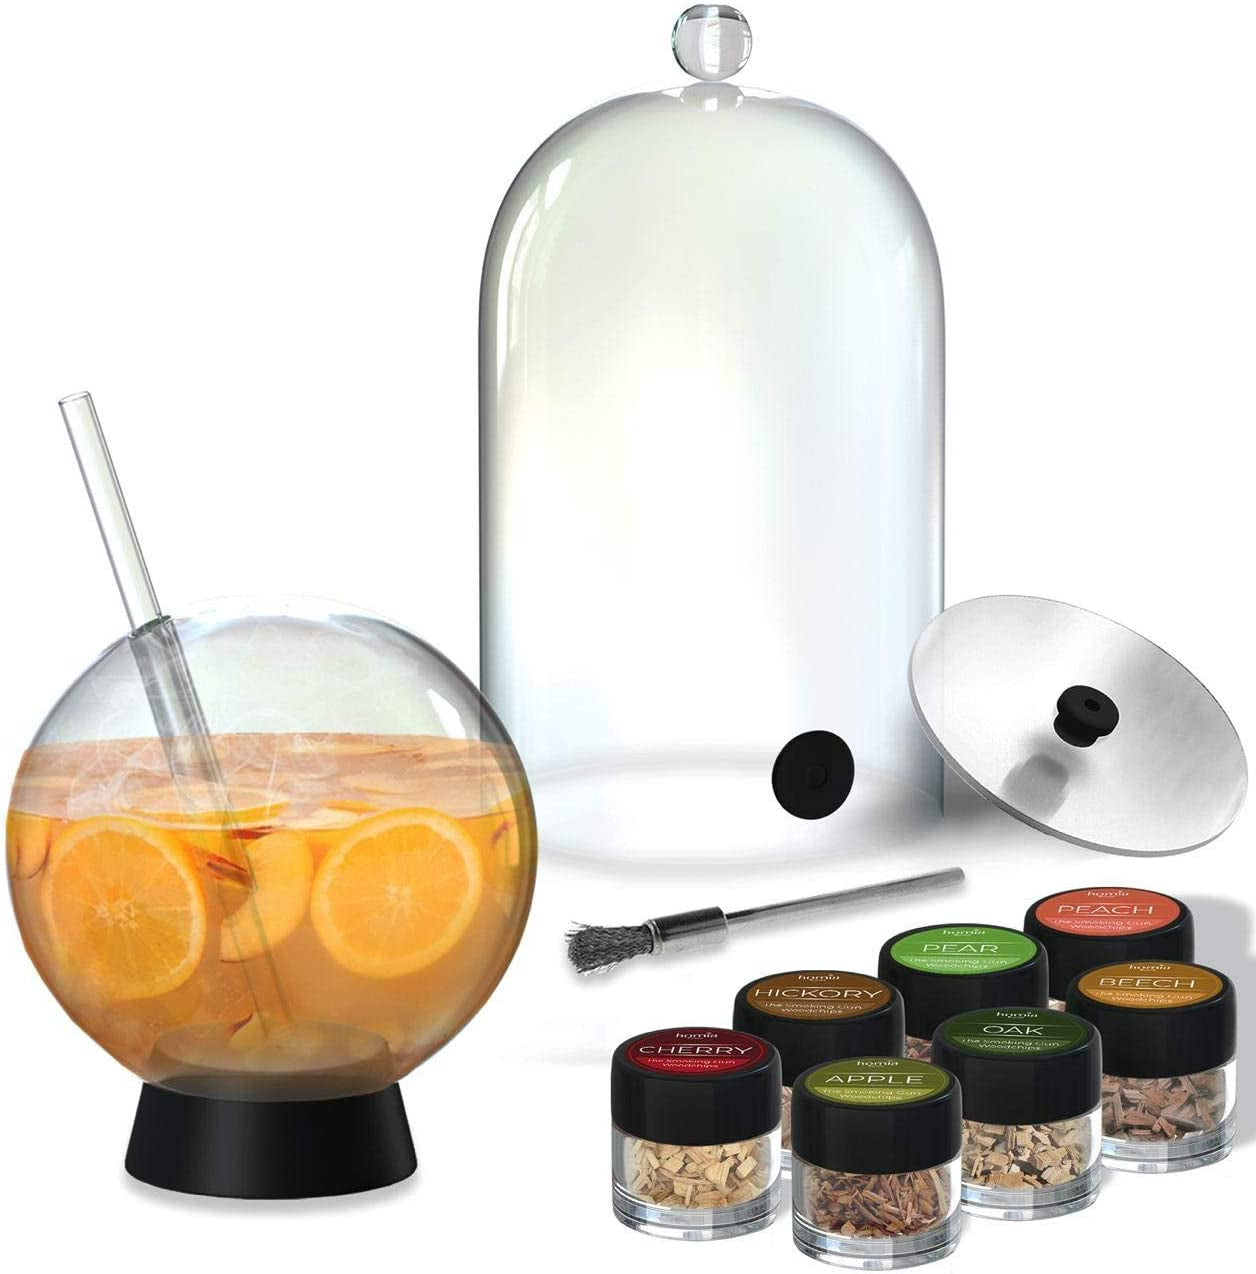 homia, Smoking Gun Accessory Set, 11 PCS, Food Smoke Infuser Accessories - Disk Lid and Cocktail Ball Glass with Straw for Drink Smoker, Dome for Cold Smoke, Smoking Cloche for Drinks, 7 Flavors Wood Chips